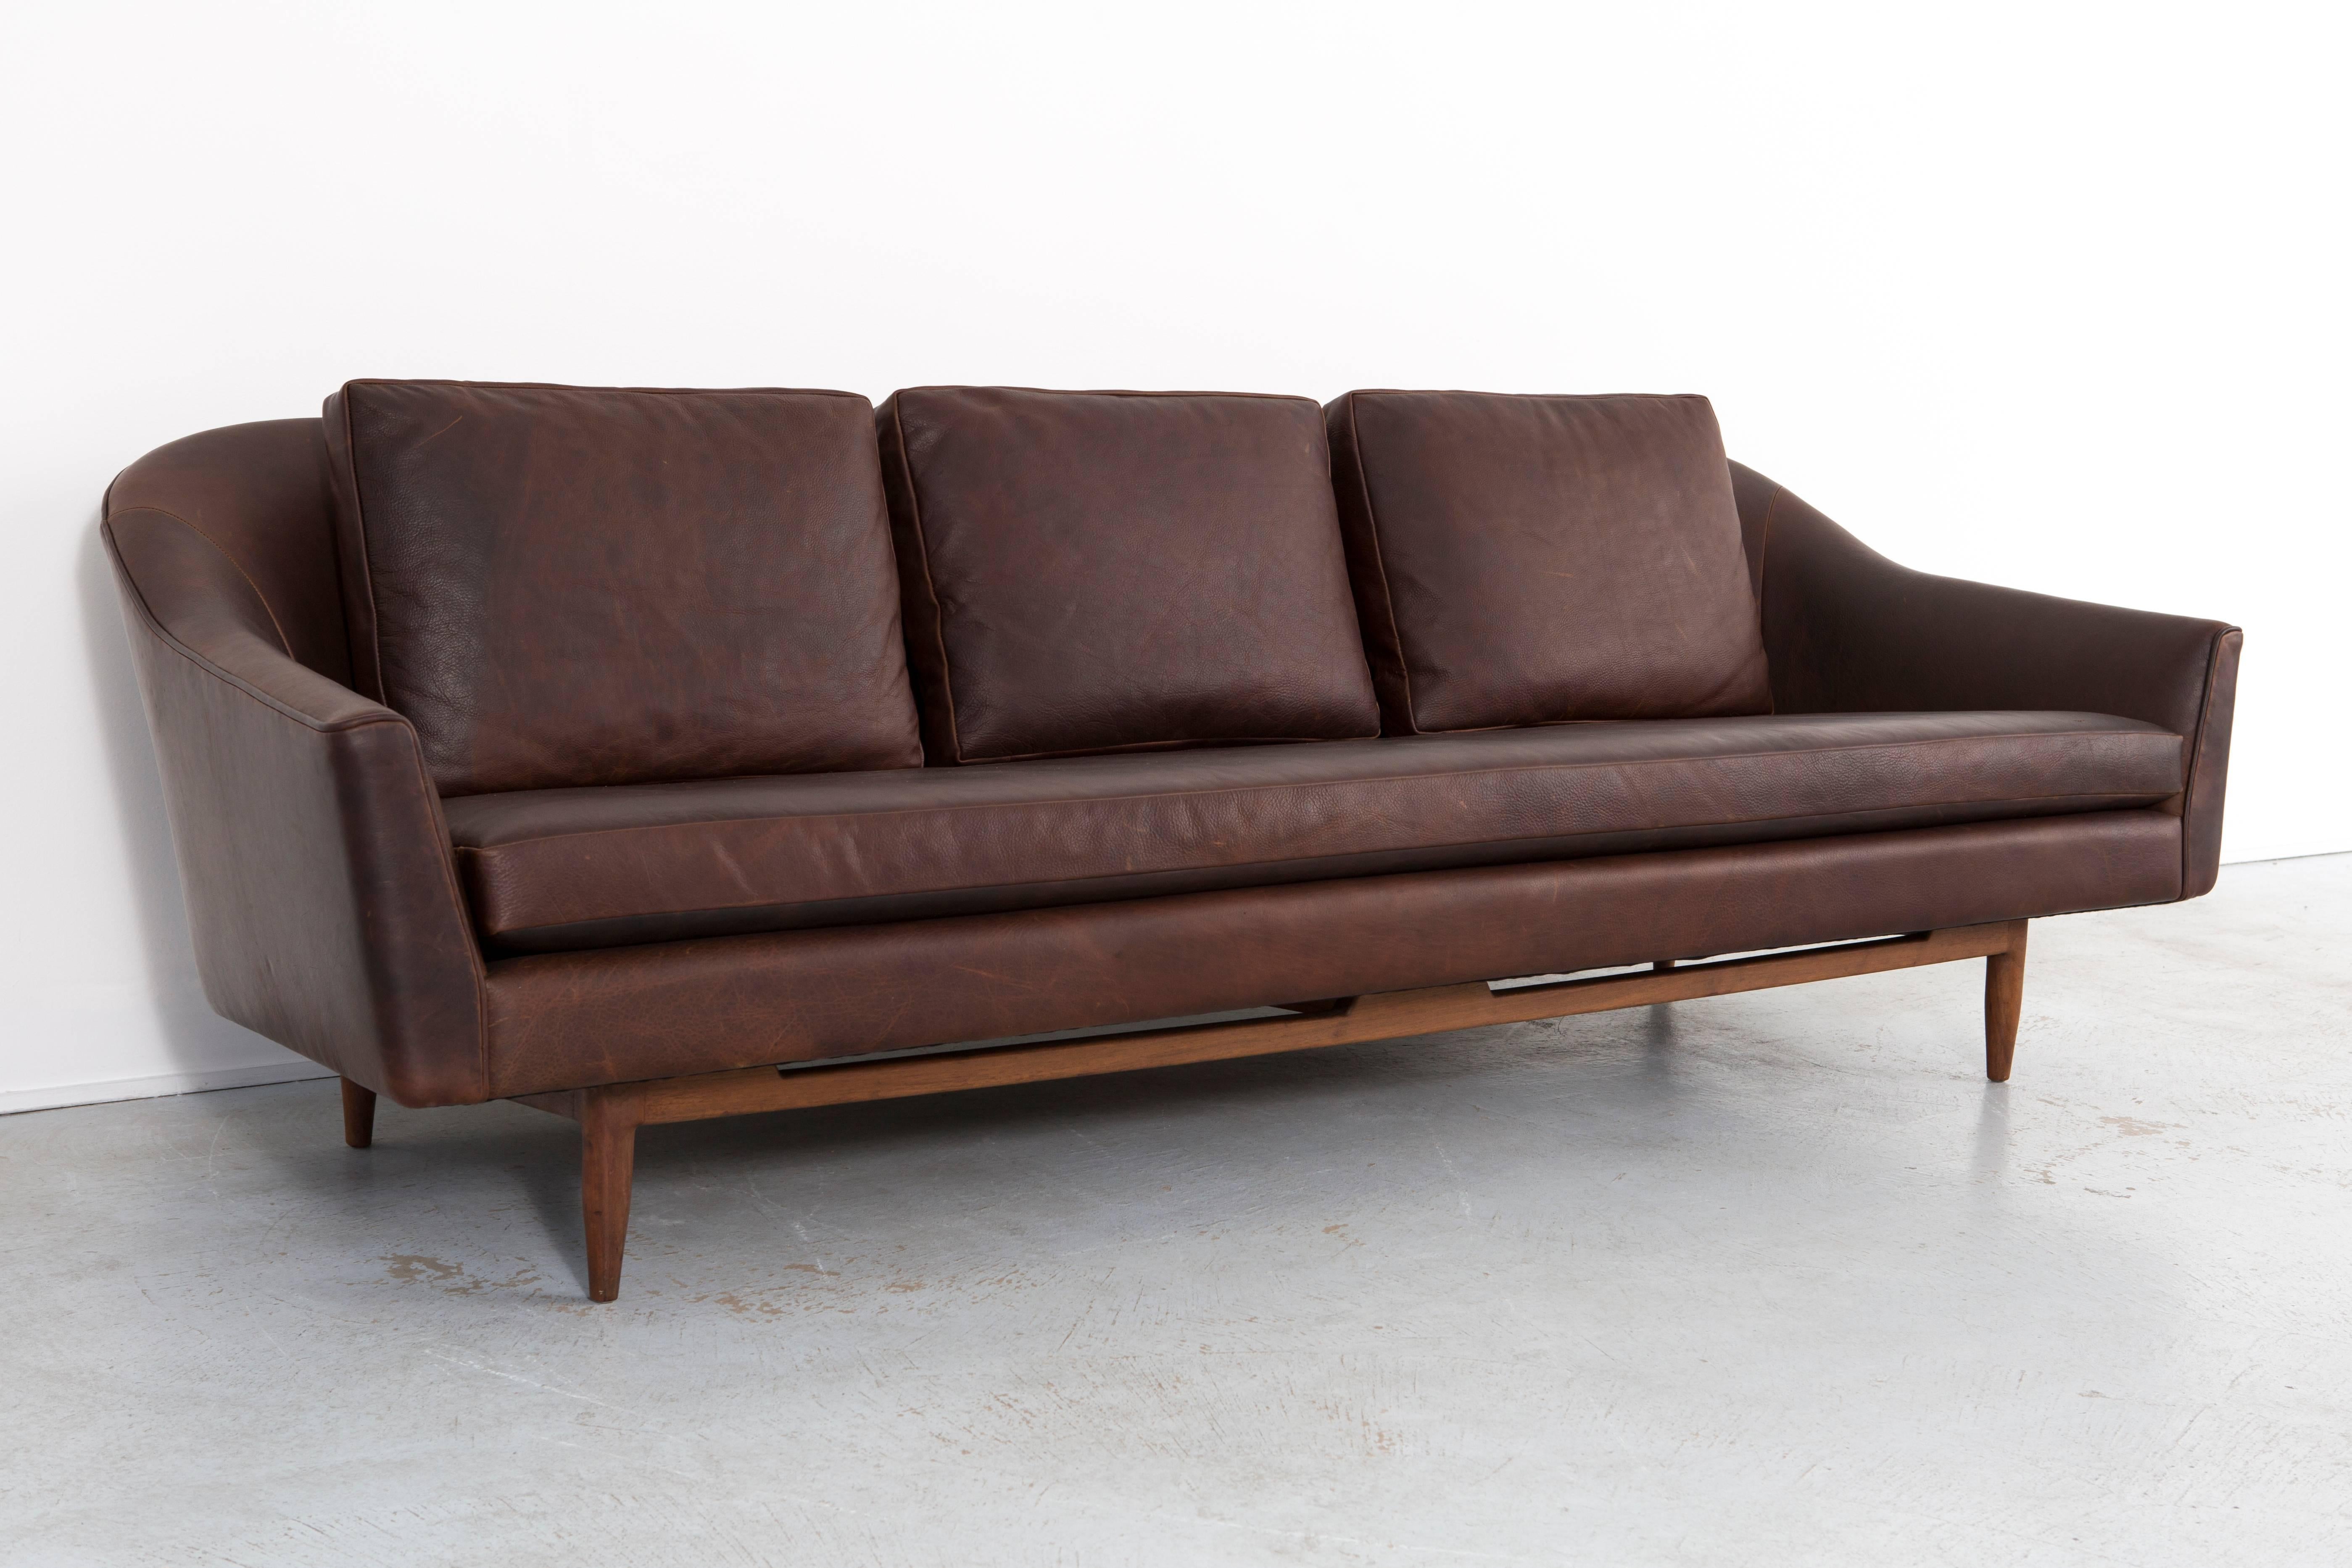 Model 2516 sofa

Designed by Jens Risom

C 1950s, Denmark

Reupholstered in leather

27" h x 91" w x 34½" d x seat 17½" h

Rare